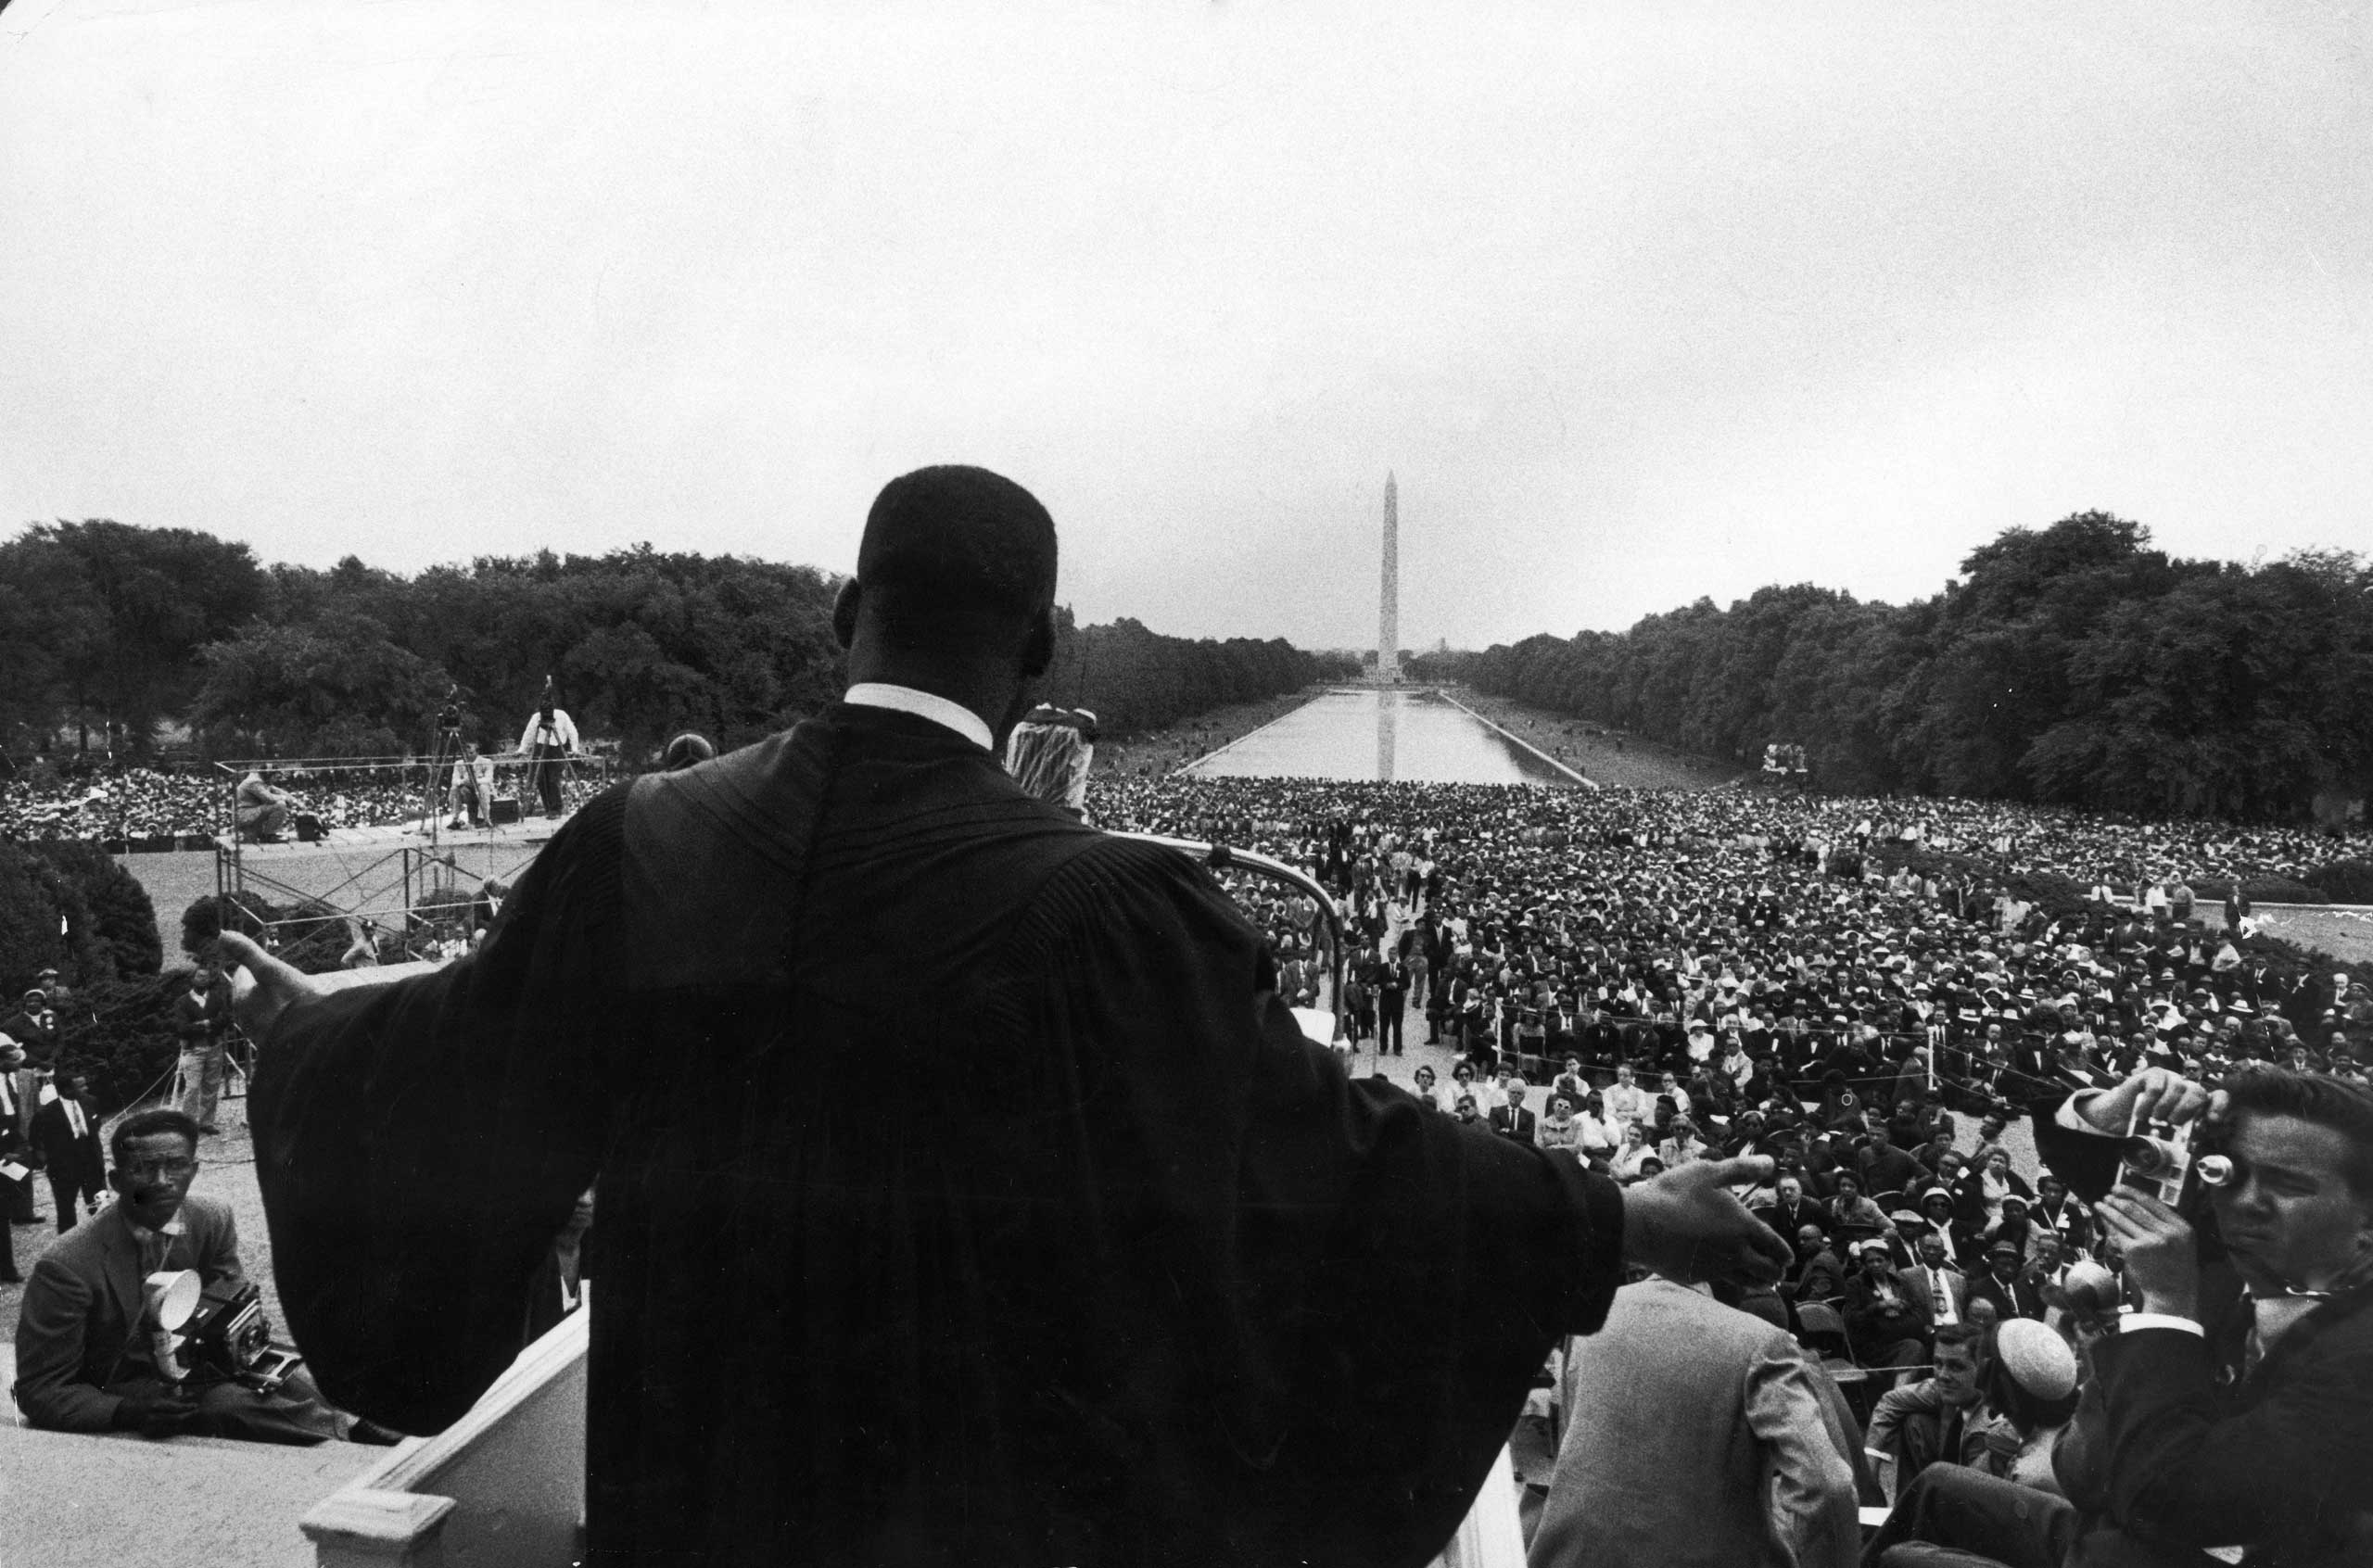 1957 | Reverend Martin Luther King Jr. speaks at the landmark Prayer Pilgrimage for Freedom in Washington, DC, one of the earliest mass rallies of the burgeoning Civil Rights Movement. Paul Schutzer took this photograph in 1957, but it did not appear in LIFE until the April 12, 1968, issue — one week after Dr. King was assassinated.